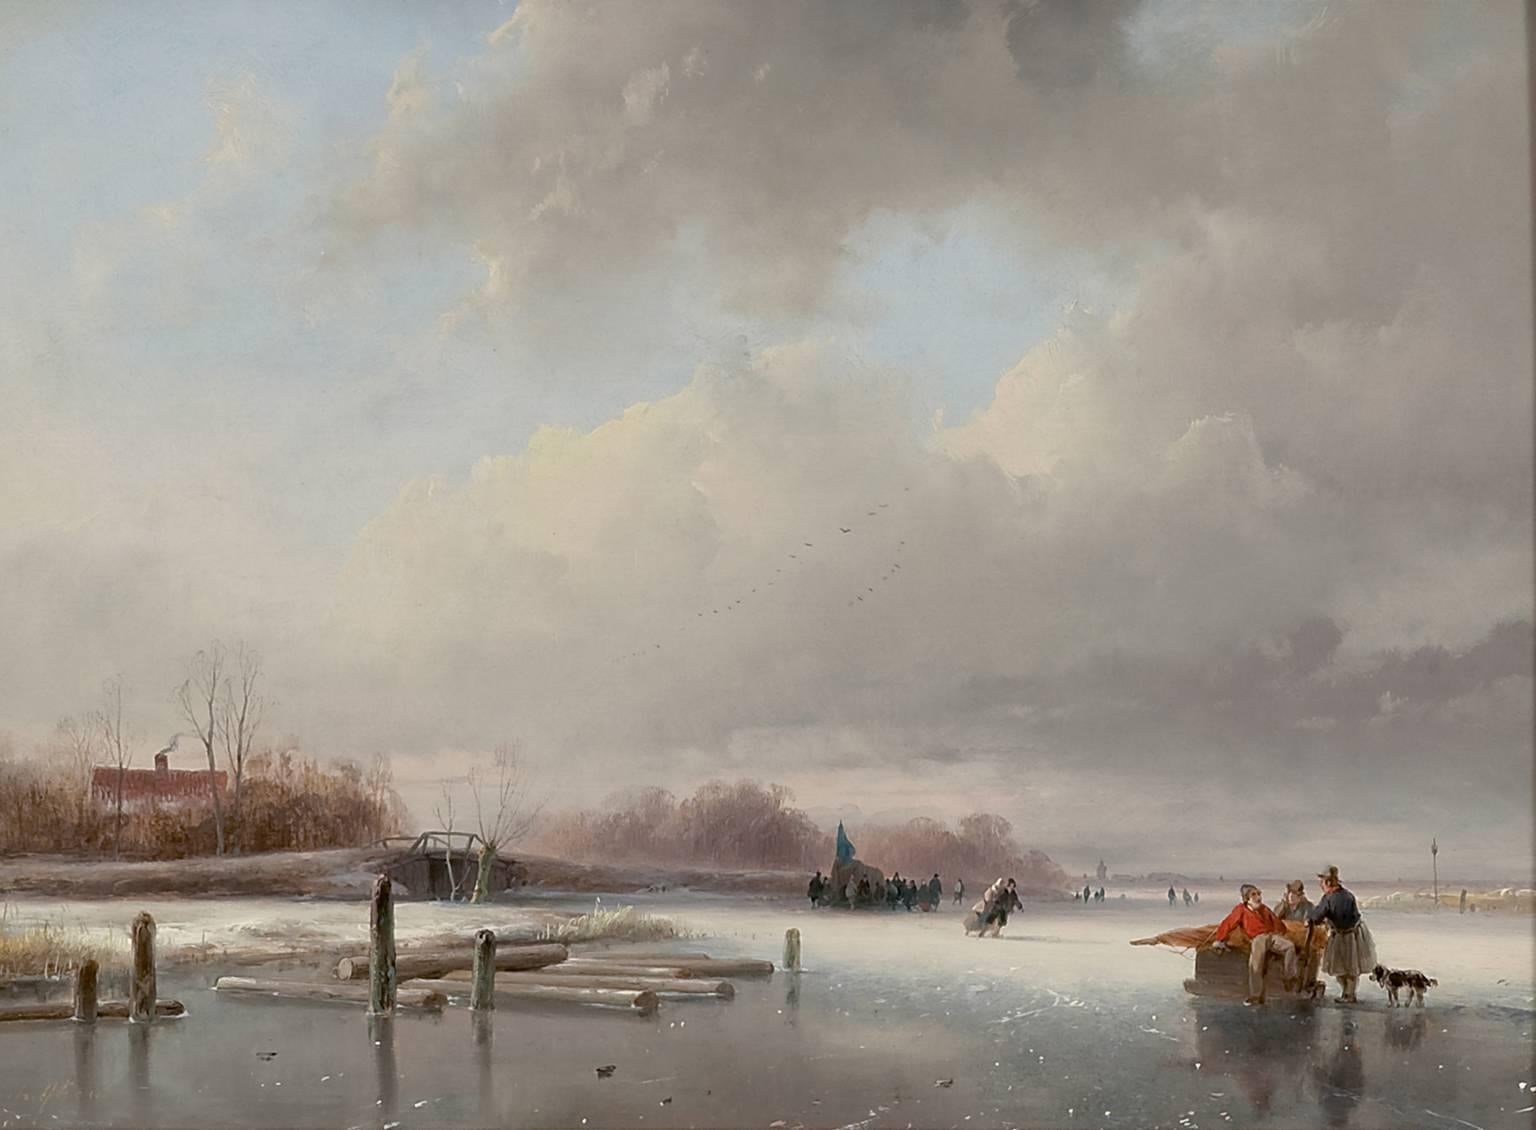 Frozen river with skaters and a koek and zopie - Painting by Andreas Schelfhout